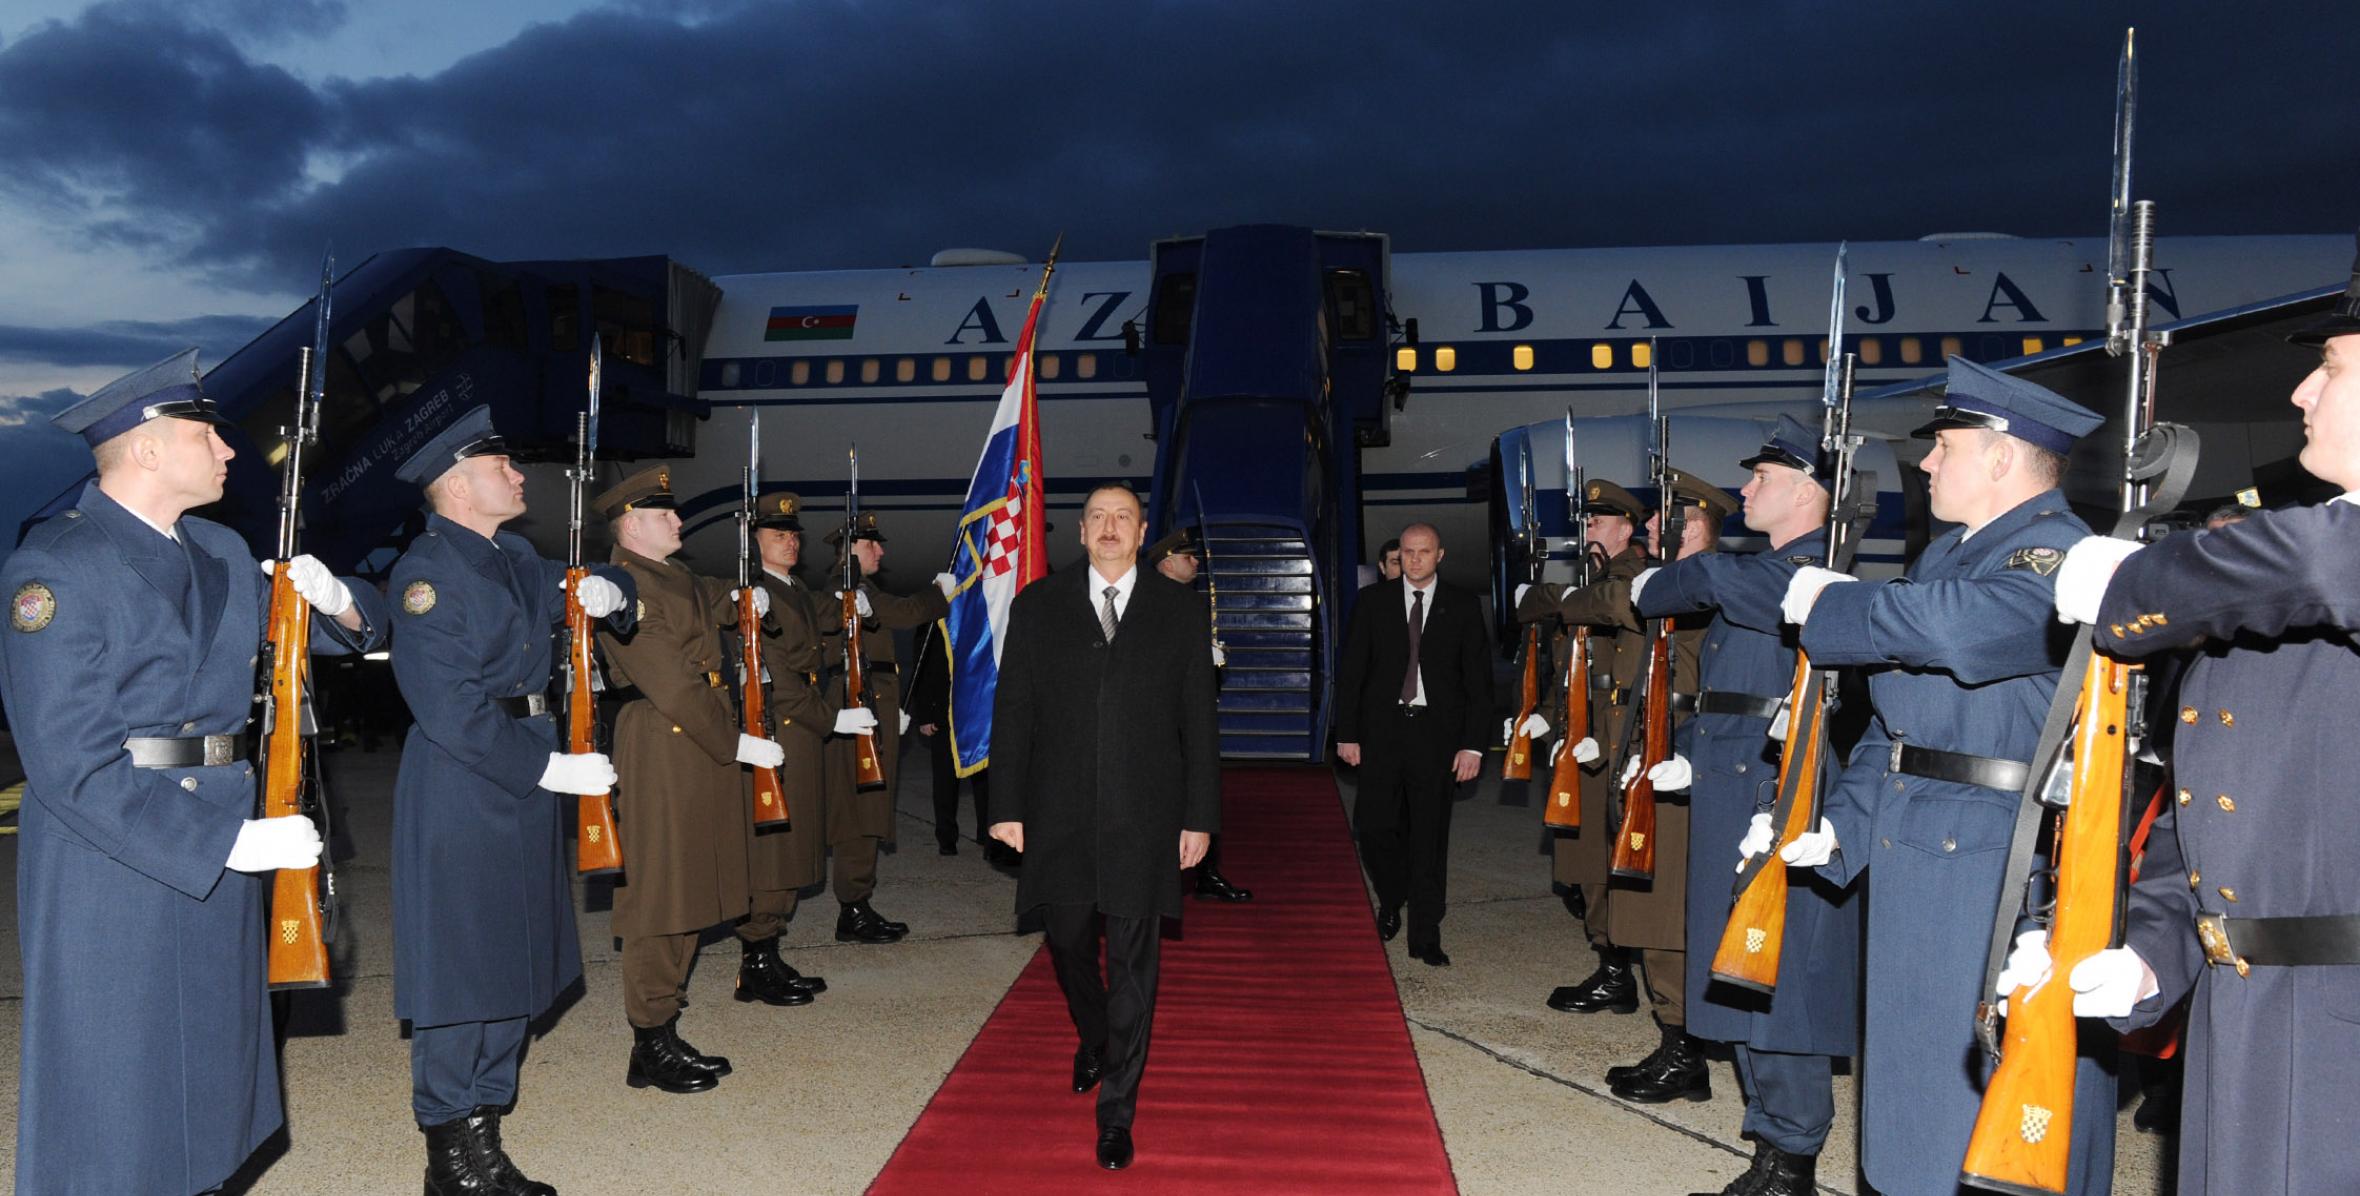 Ilham Aliyev arrived in Croatia on official visit